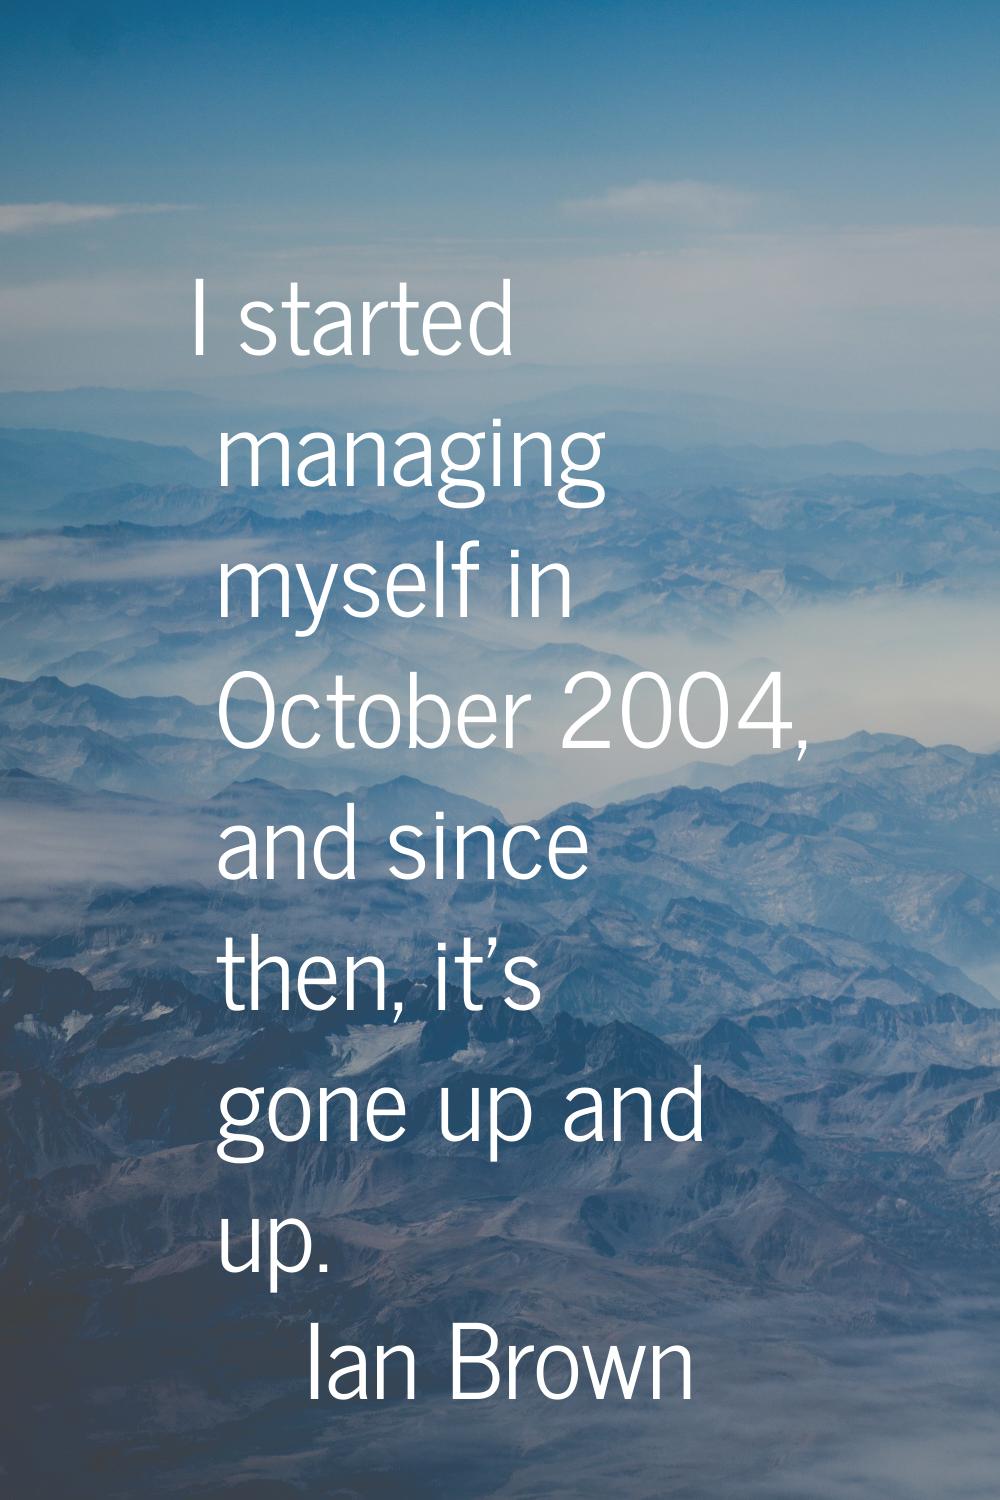 I started managing myself in October 2004, and since then, it's gone up and up.